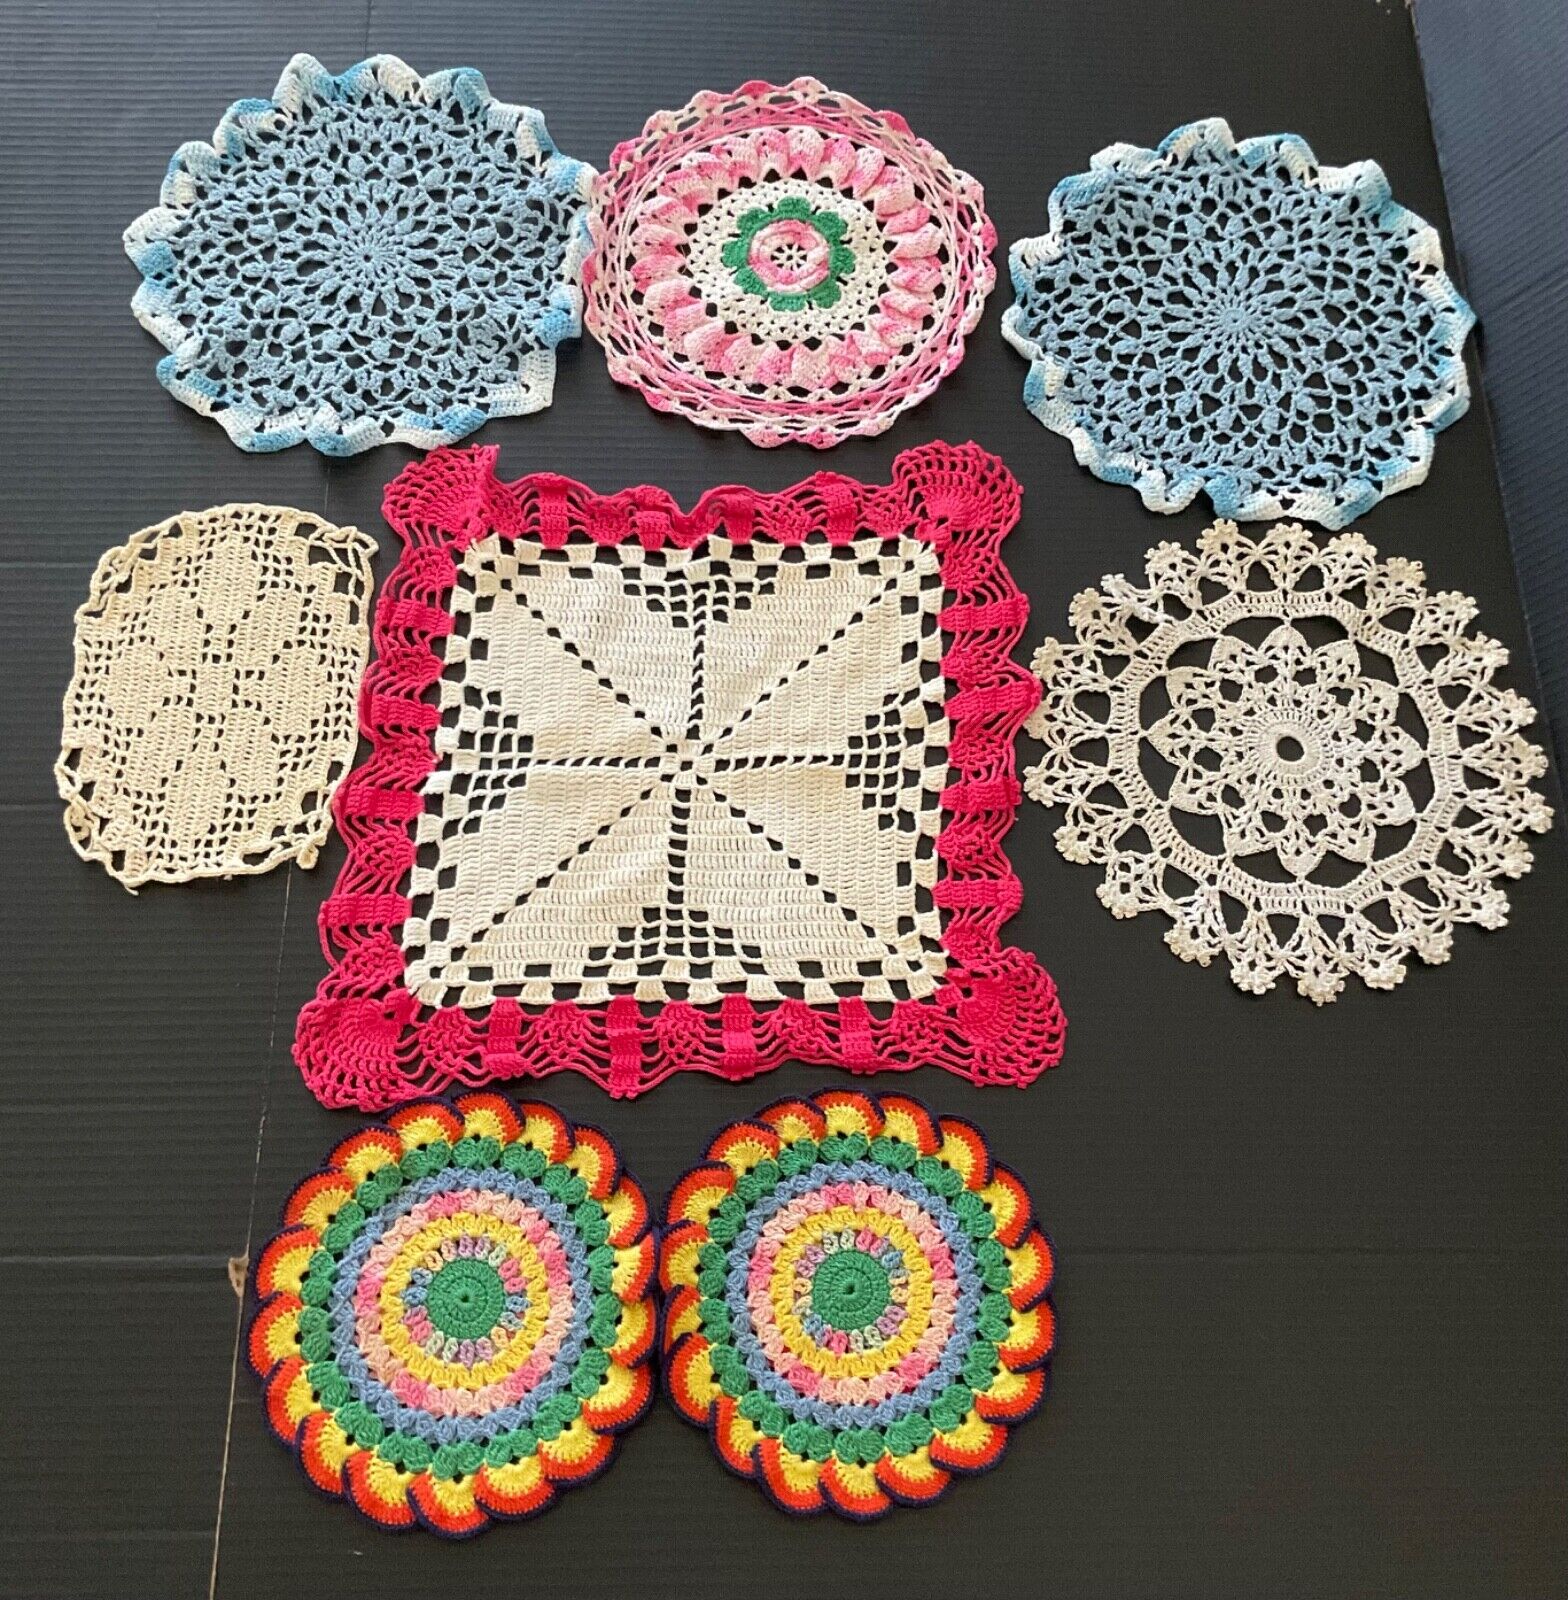 VTG Lot of 8* Incredible Handcrafted Various Sizes & Colorful Doilies*